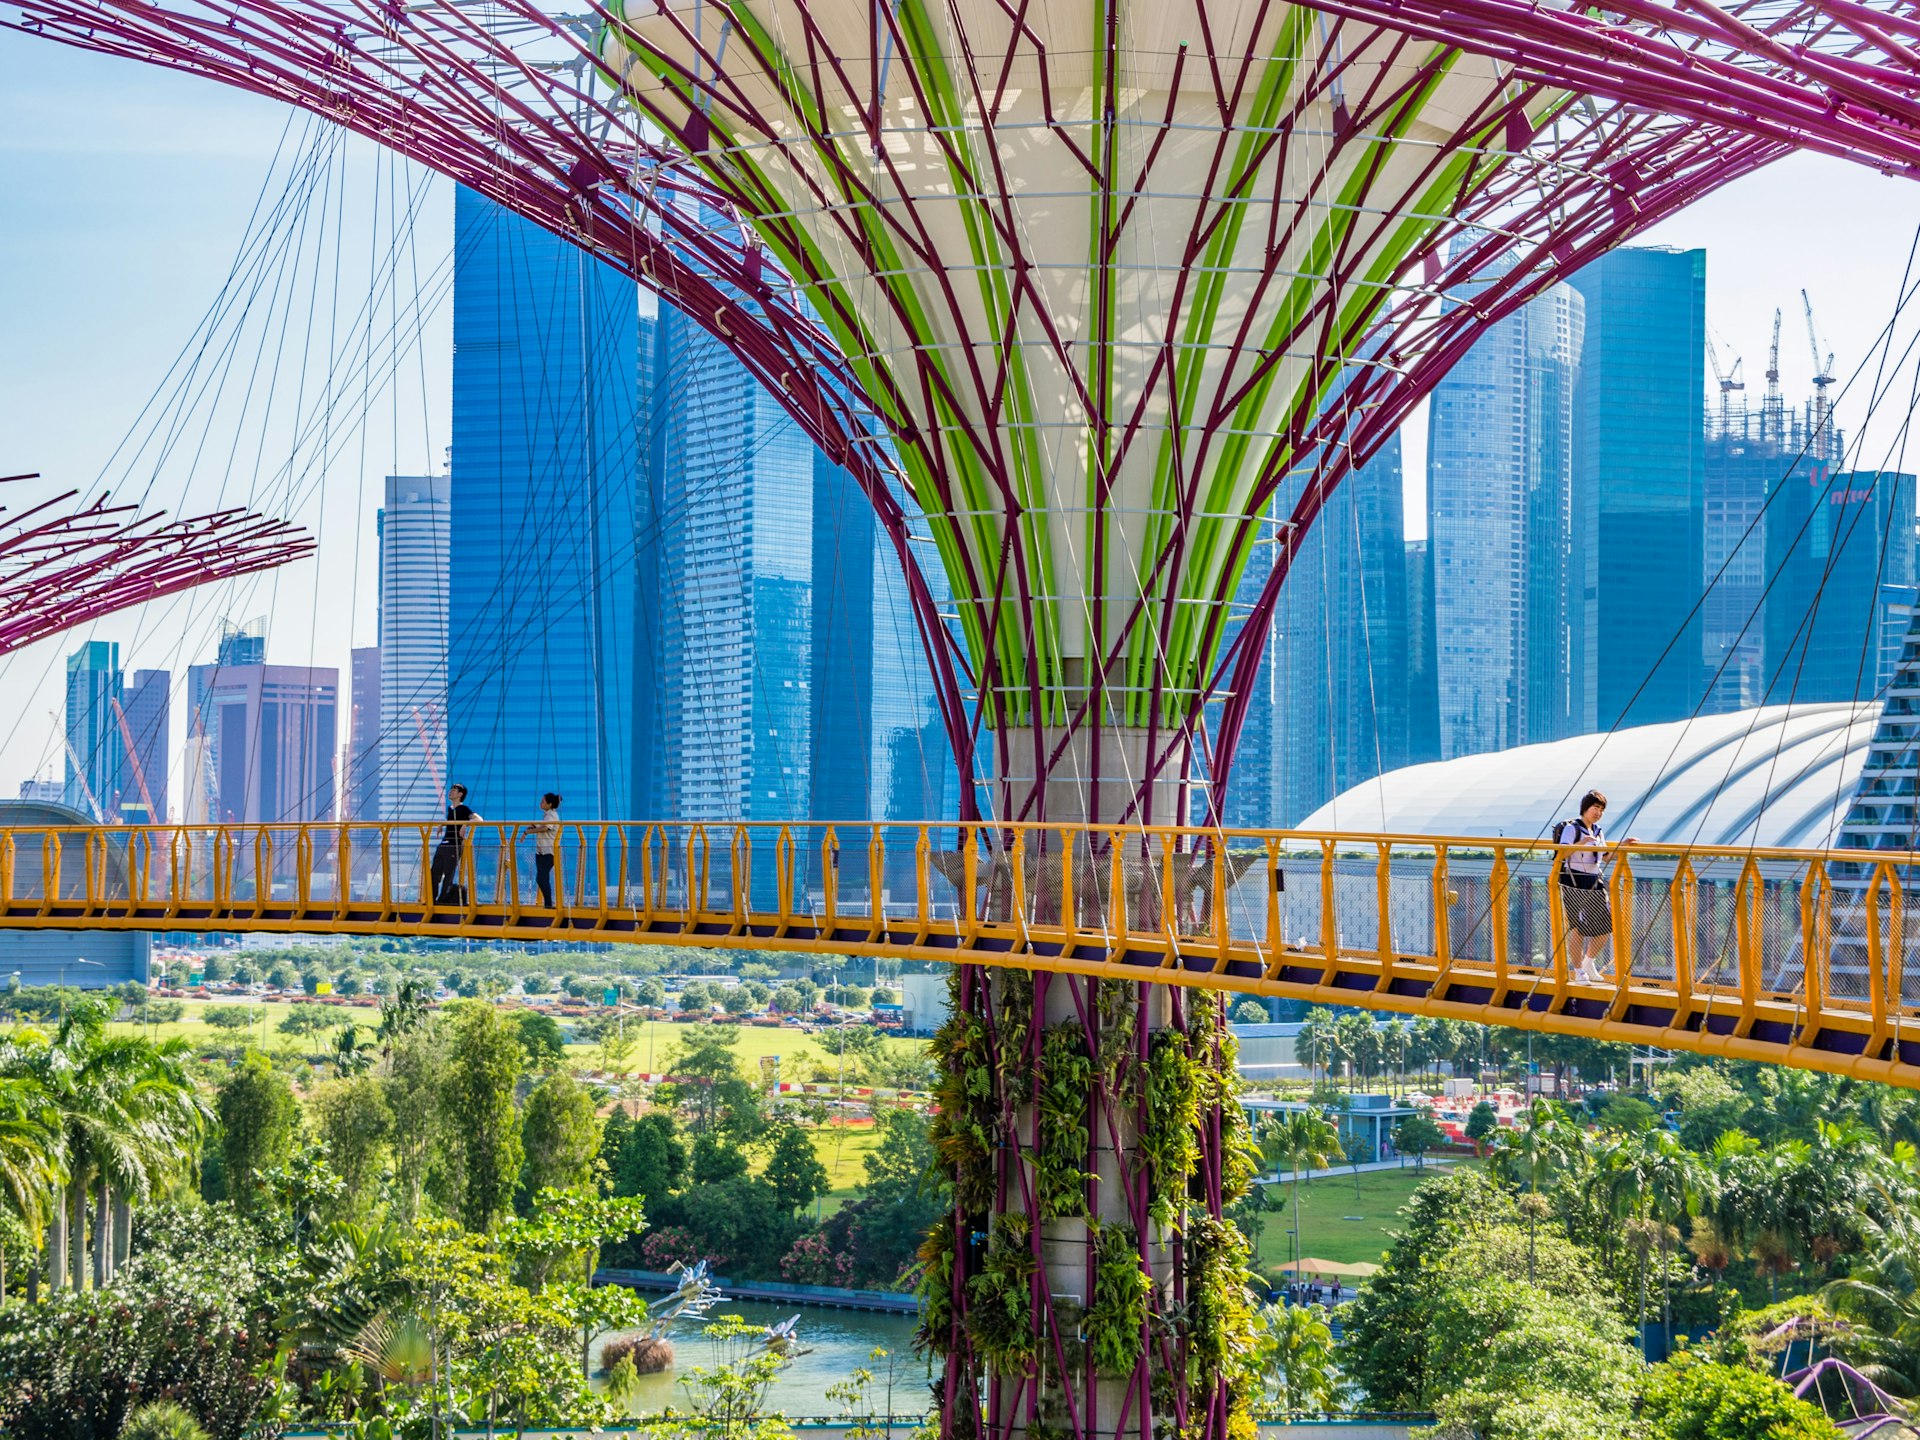 People walking on a canopy bridge in Gardens by the Bay, Singapore